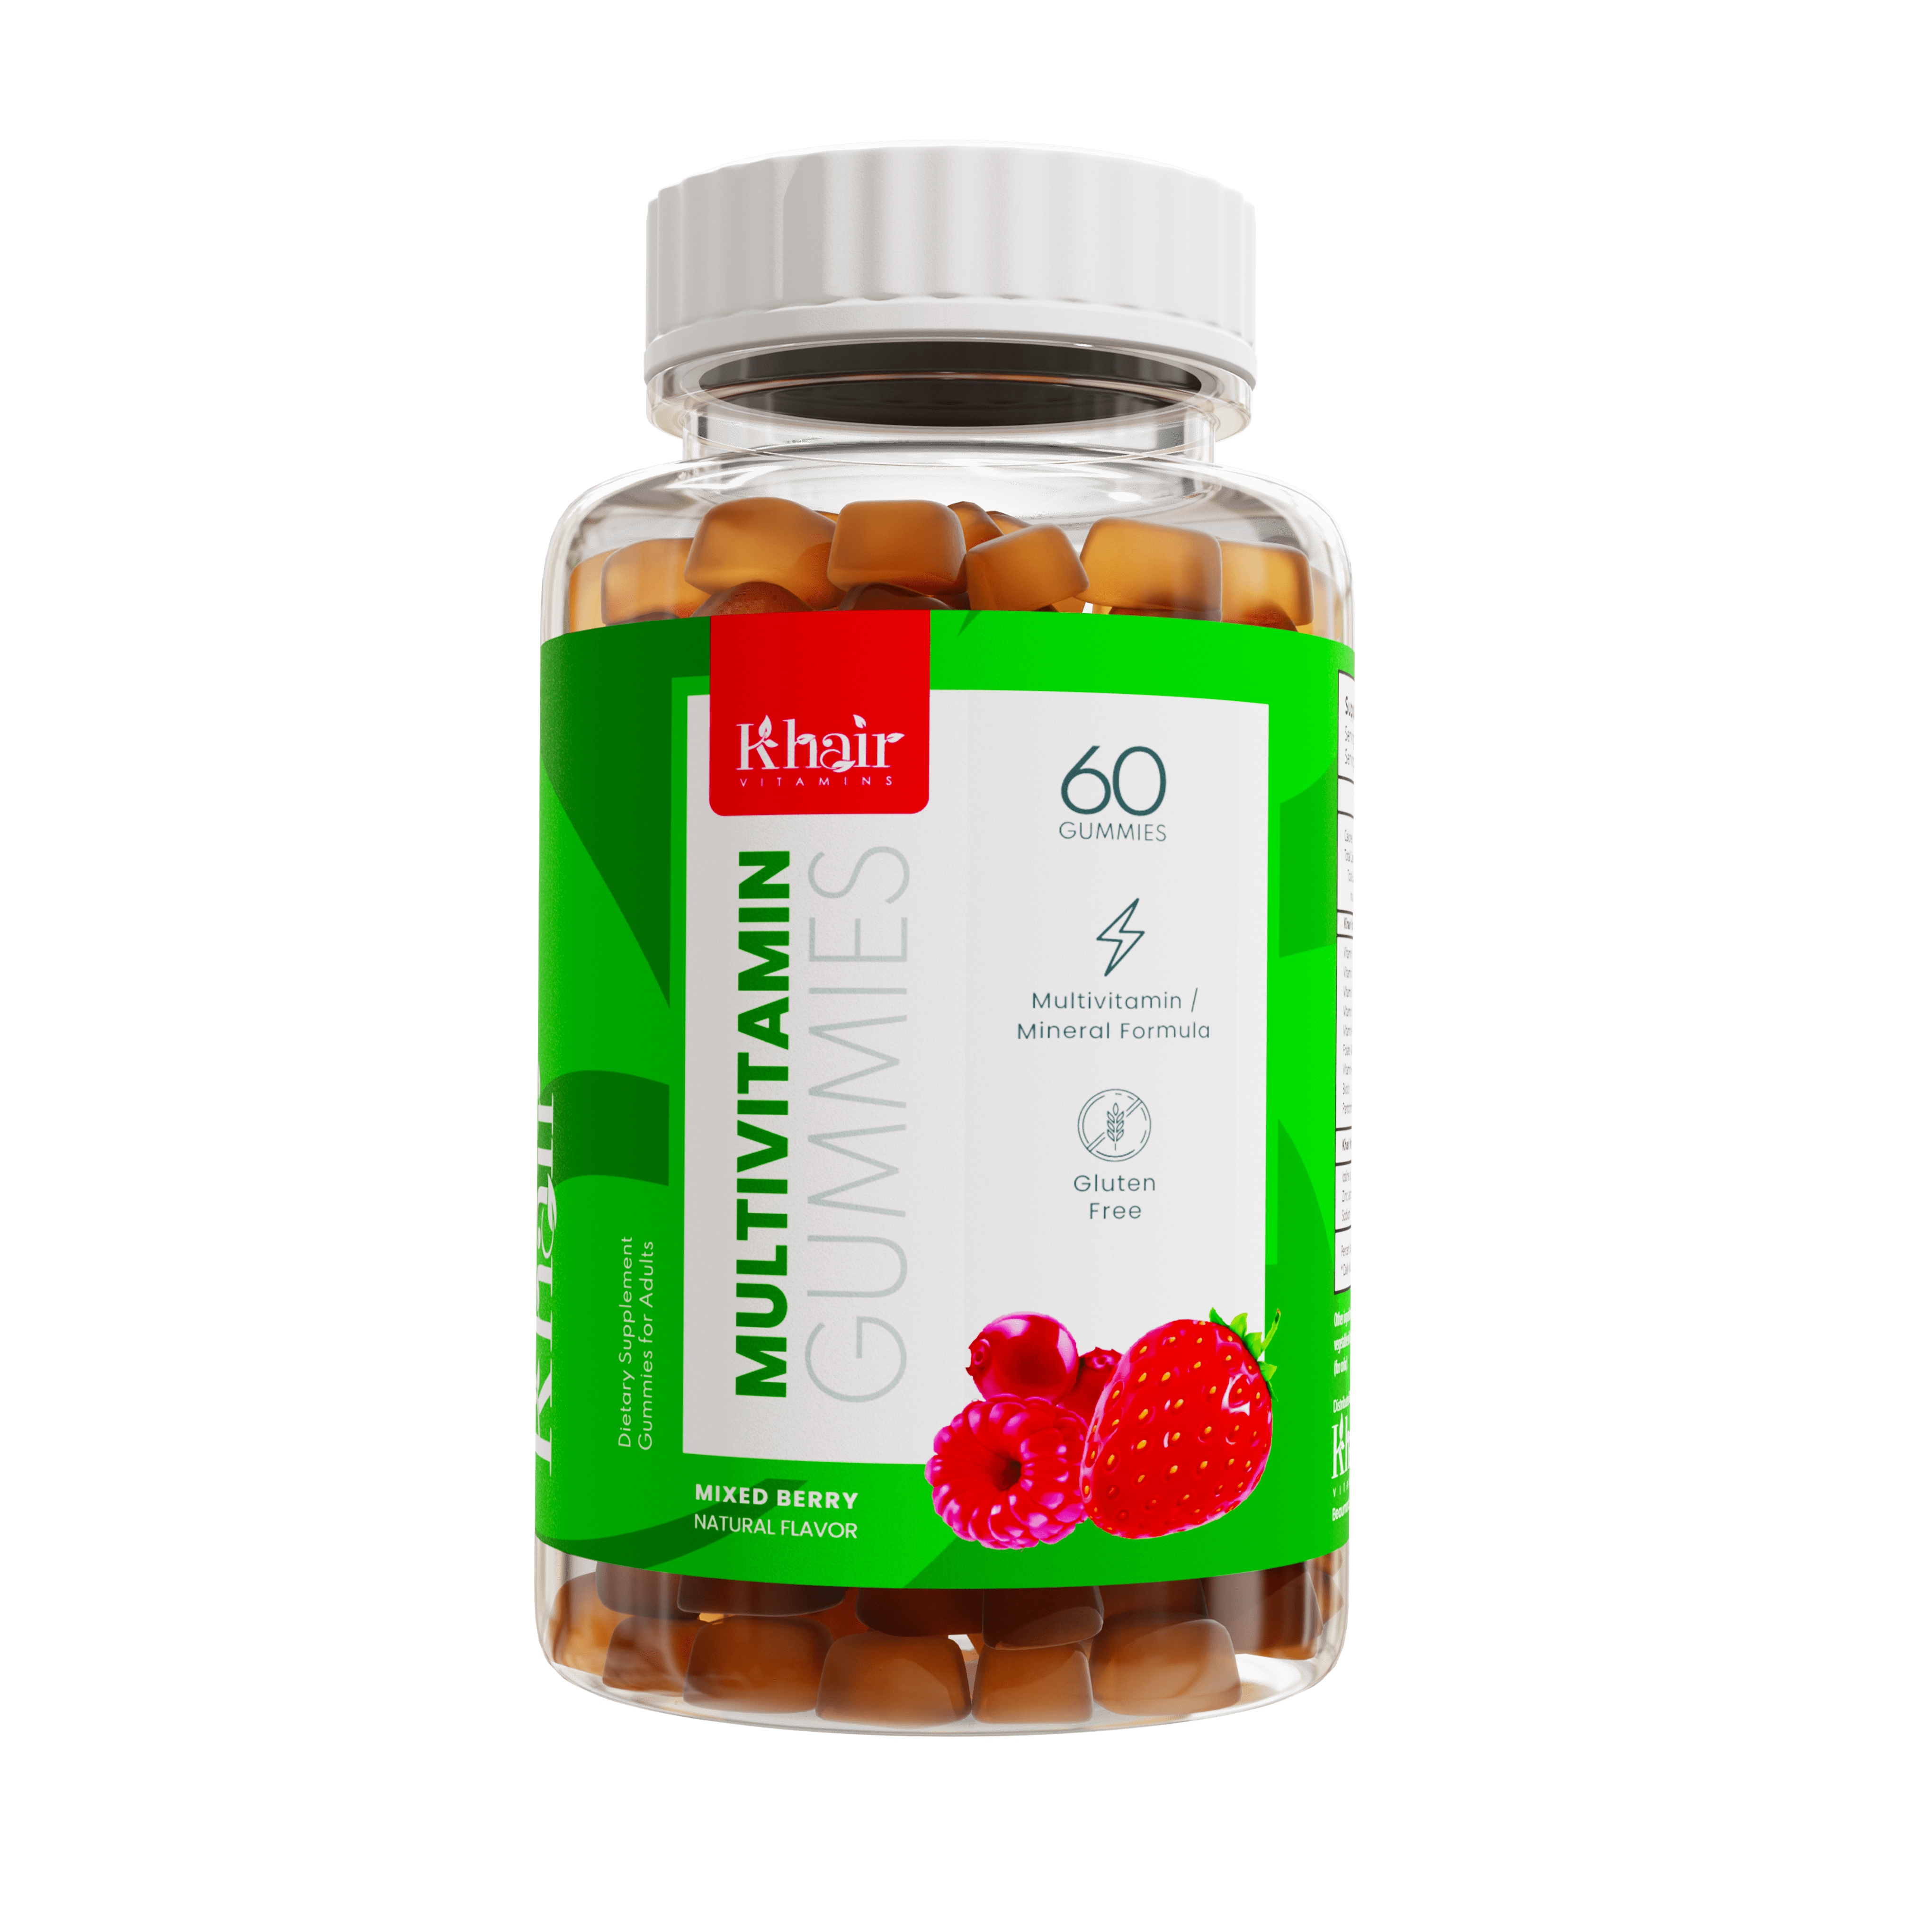 A bottle of 'Khair' multivitamin gummies with a green label, showing 60 brown gummy supplements and images of red berries